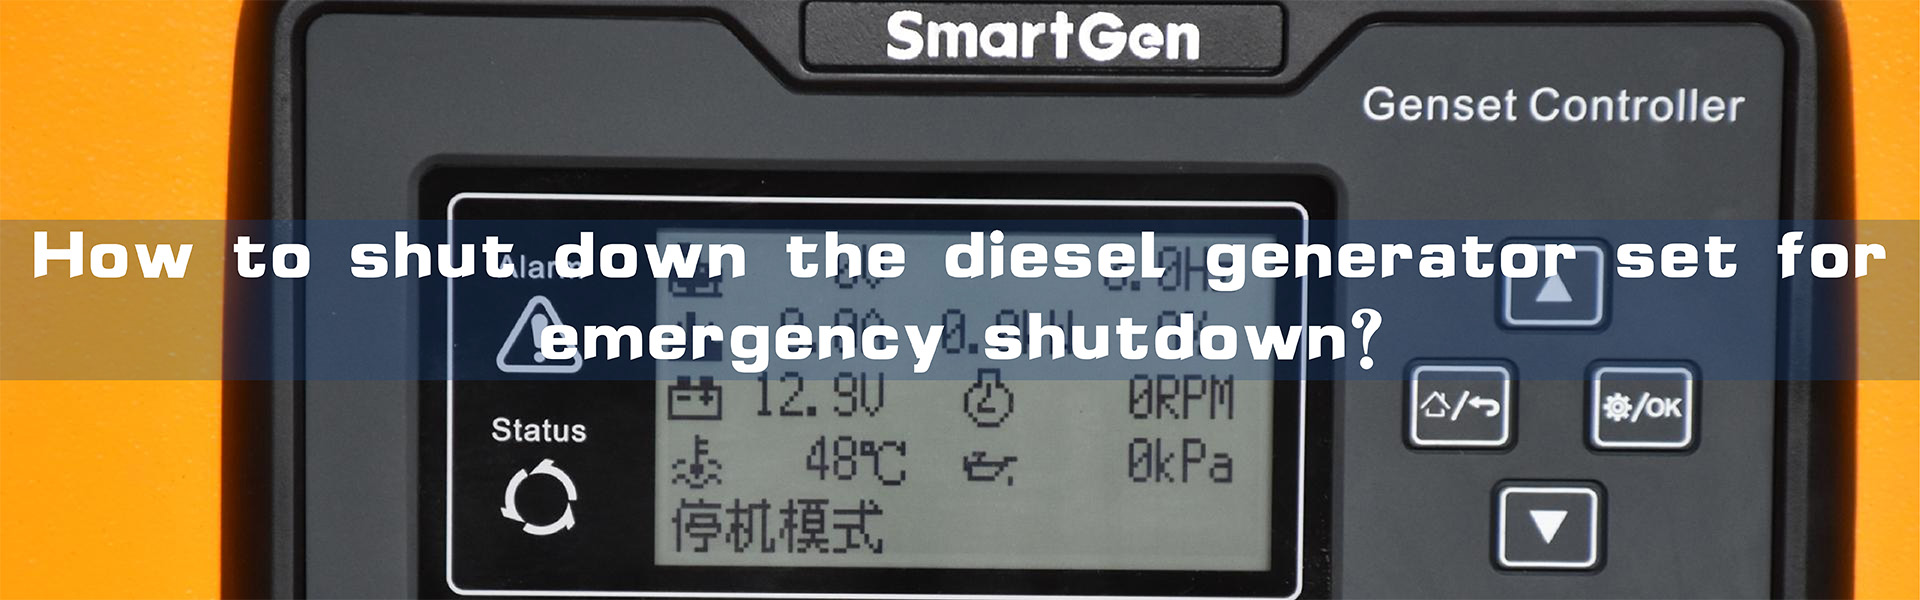 How to shut down the diesel generator set and which circumstances require emergency shutdown?